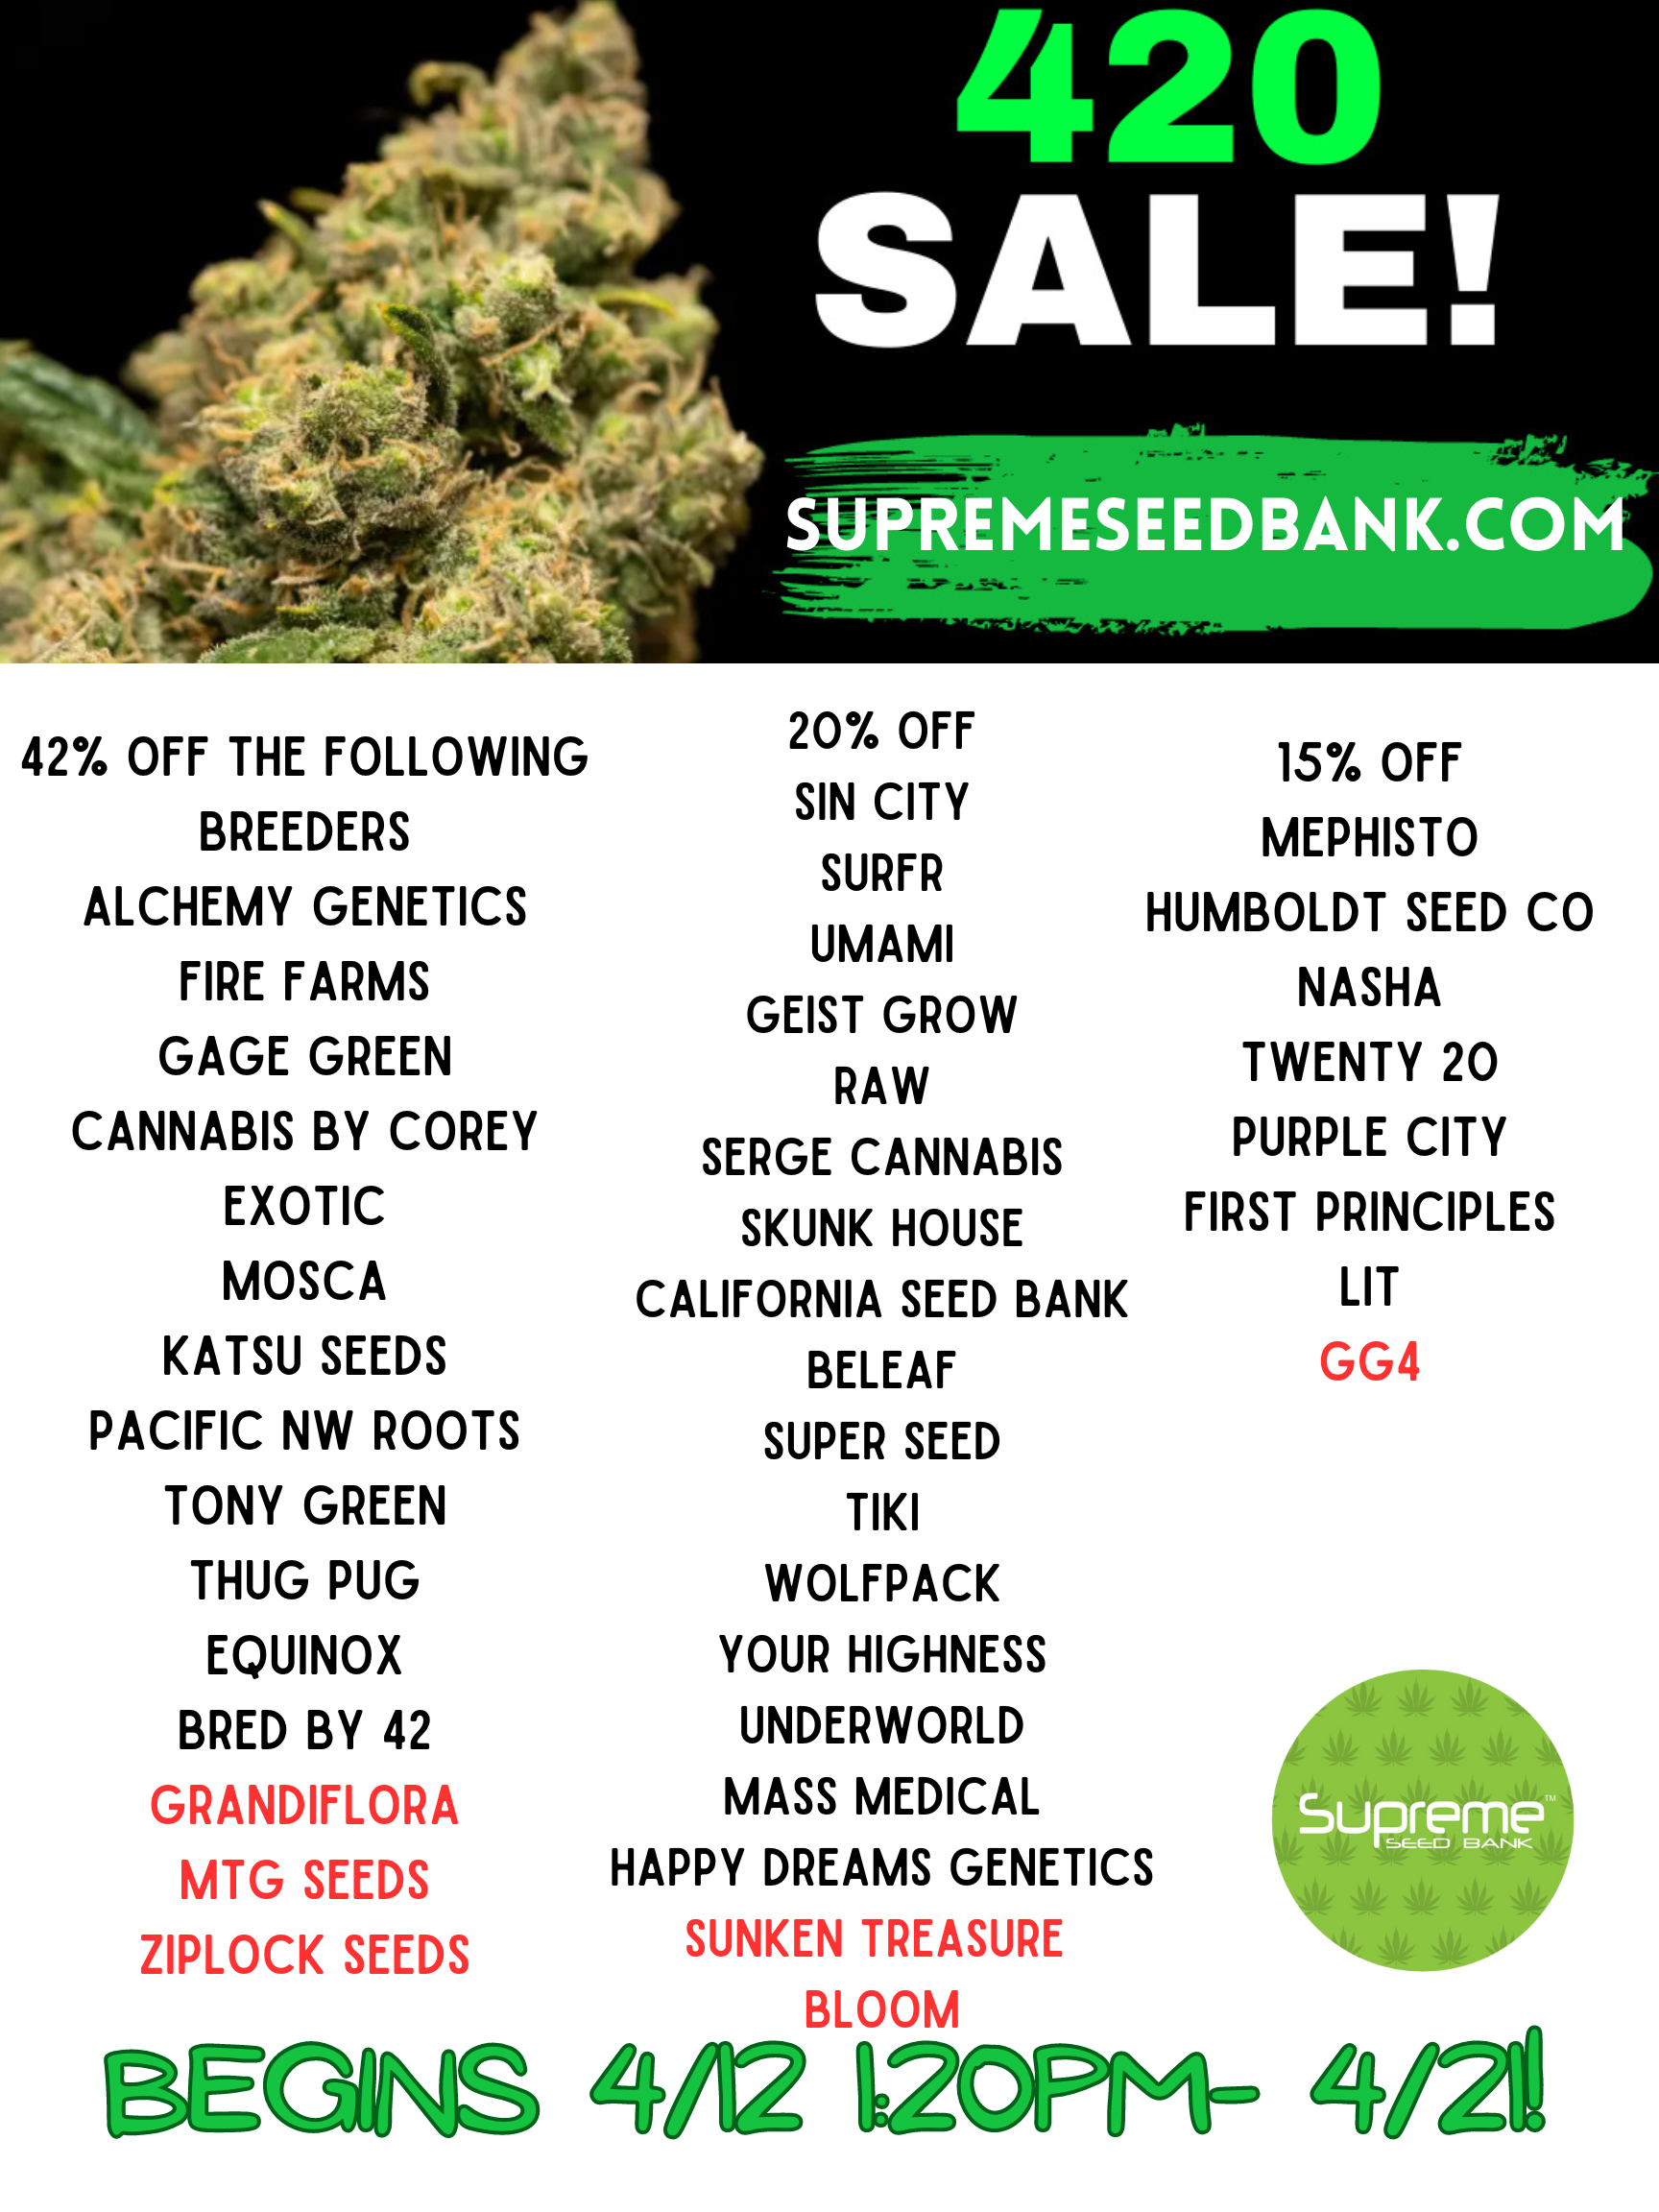 42% off the following breeders Alchemy Genetics Fire Farms Gage Green Cannabis by Corey Exotic Mosca Katsu Seeds Pacific NW Roots Tony Green Thug Pug Equinox 20% off Sin City Surfr Umami Geist Gro (1)